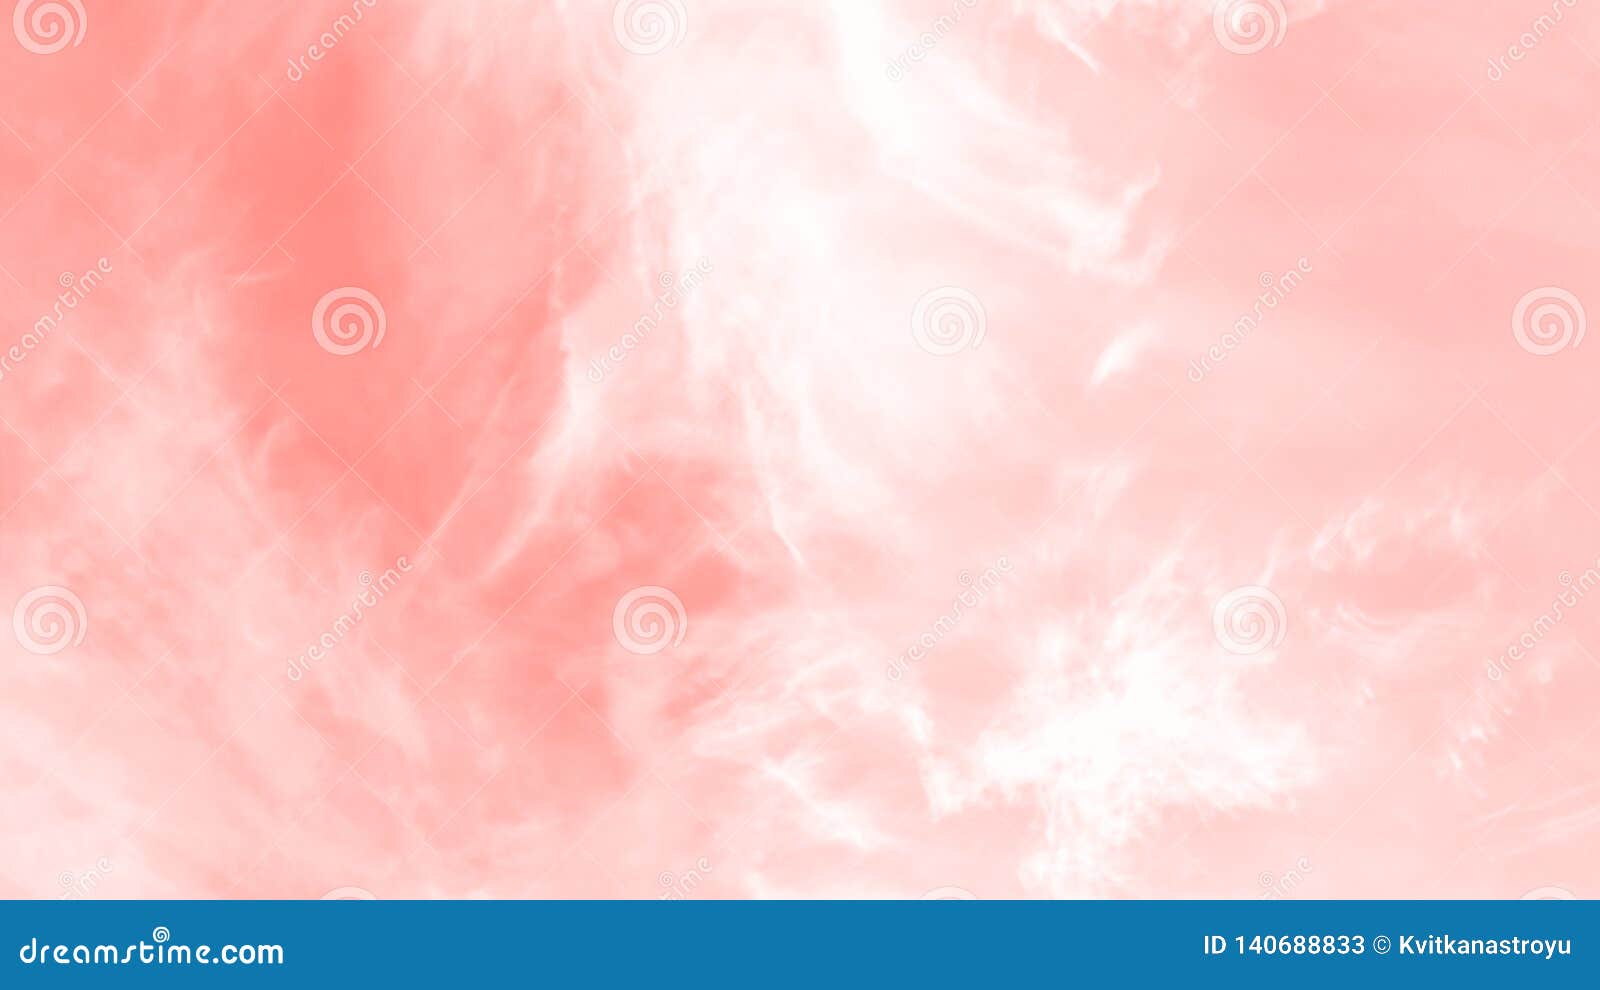 light coral color sky with cirro cumulus clouds. looks like a marble texture. trendy 2019. 16:9